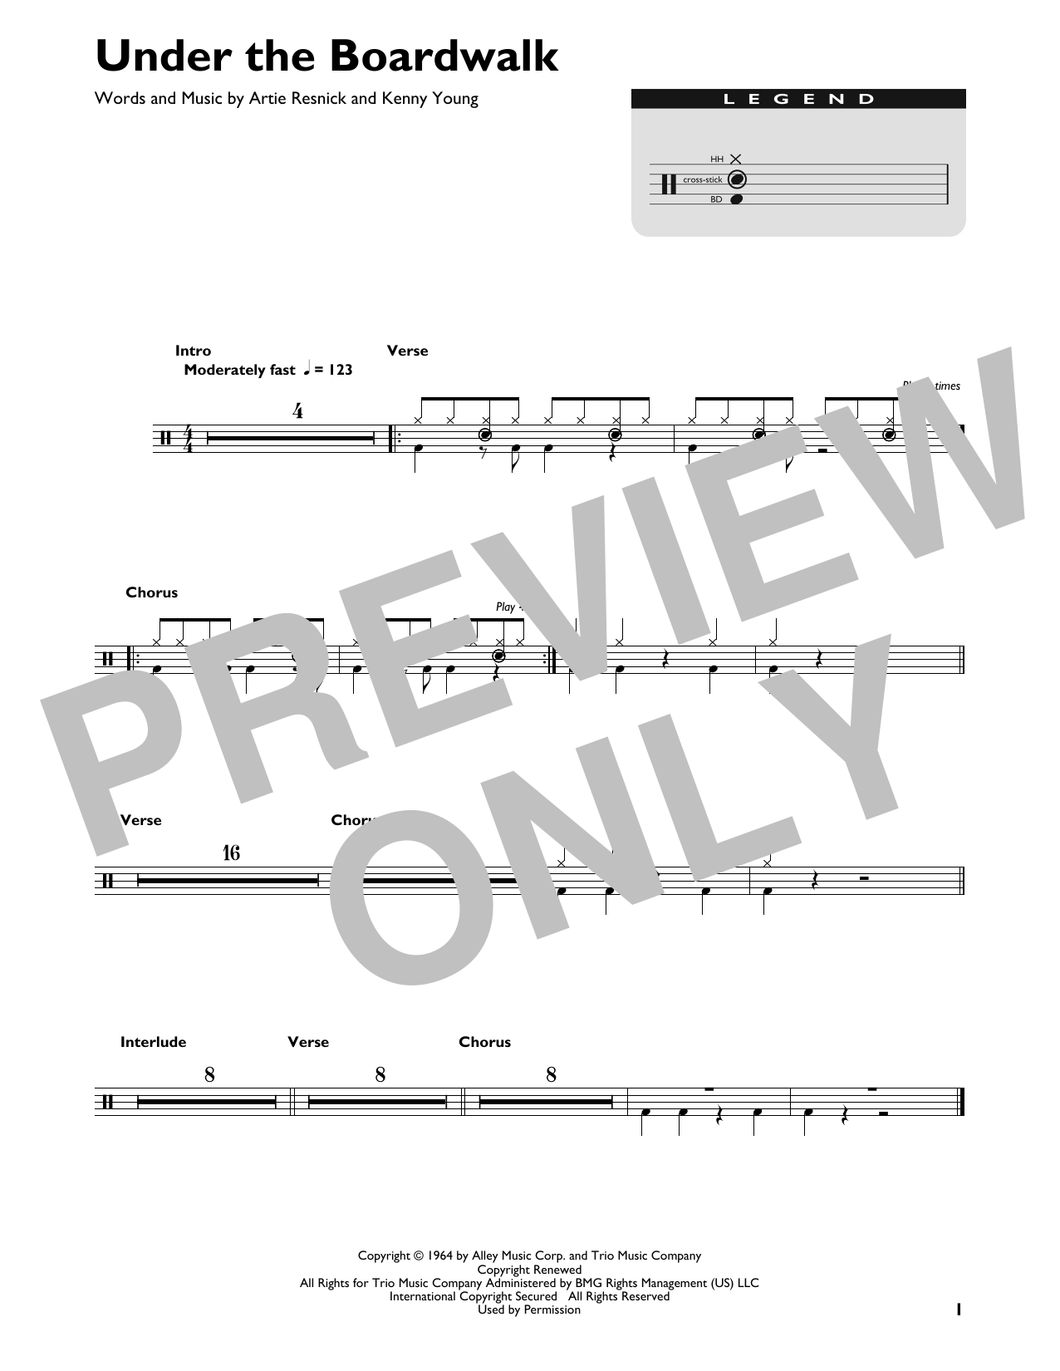 Under the Boardwalk - The Drifters - Full Drum Transcription / Drum Sheet Music - SheetMusicDirect DT